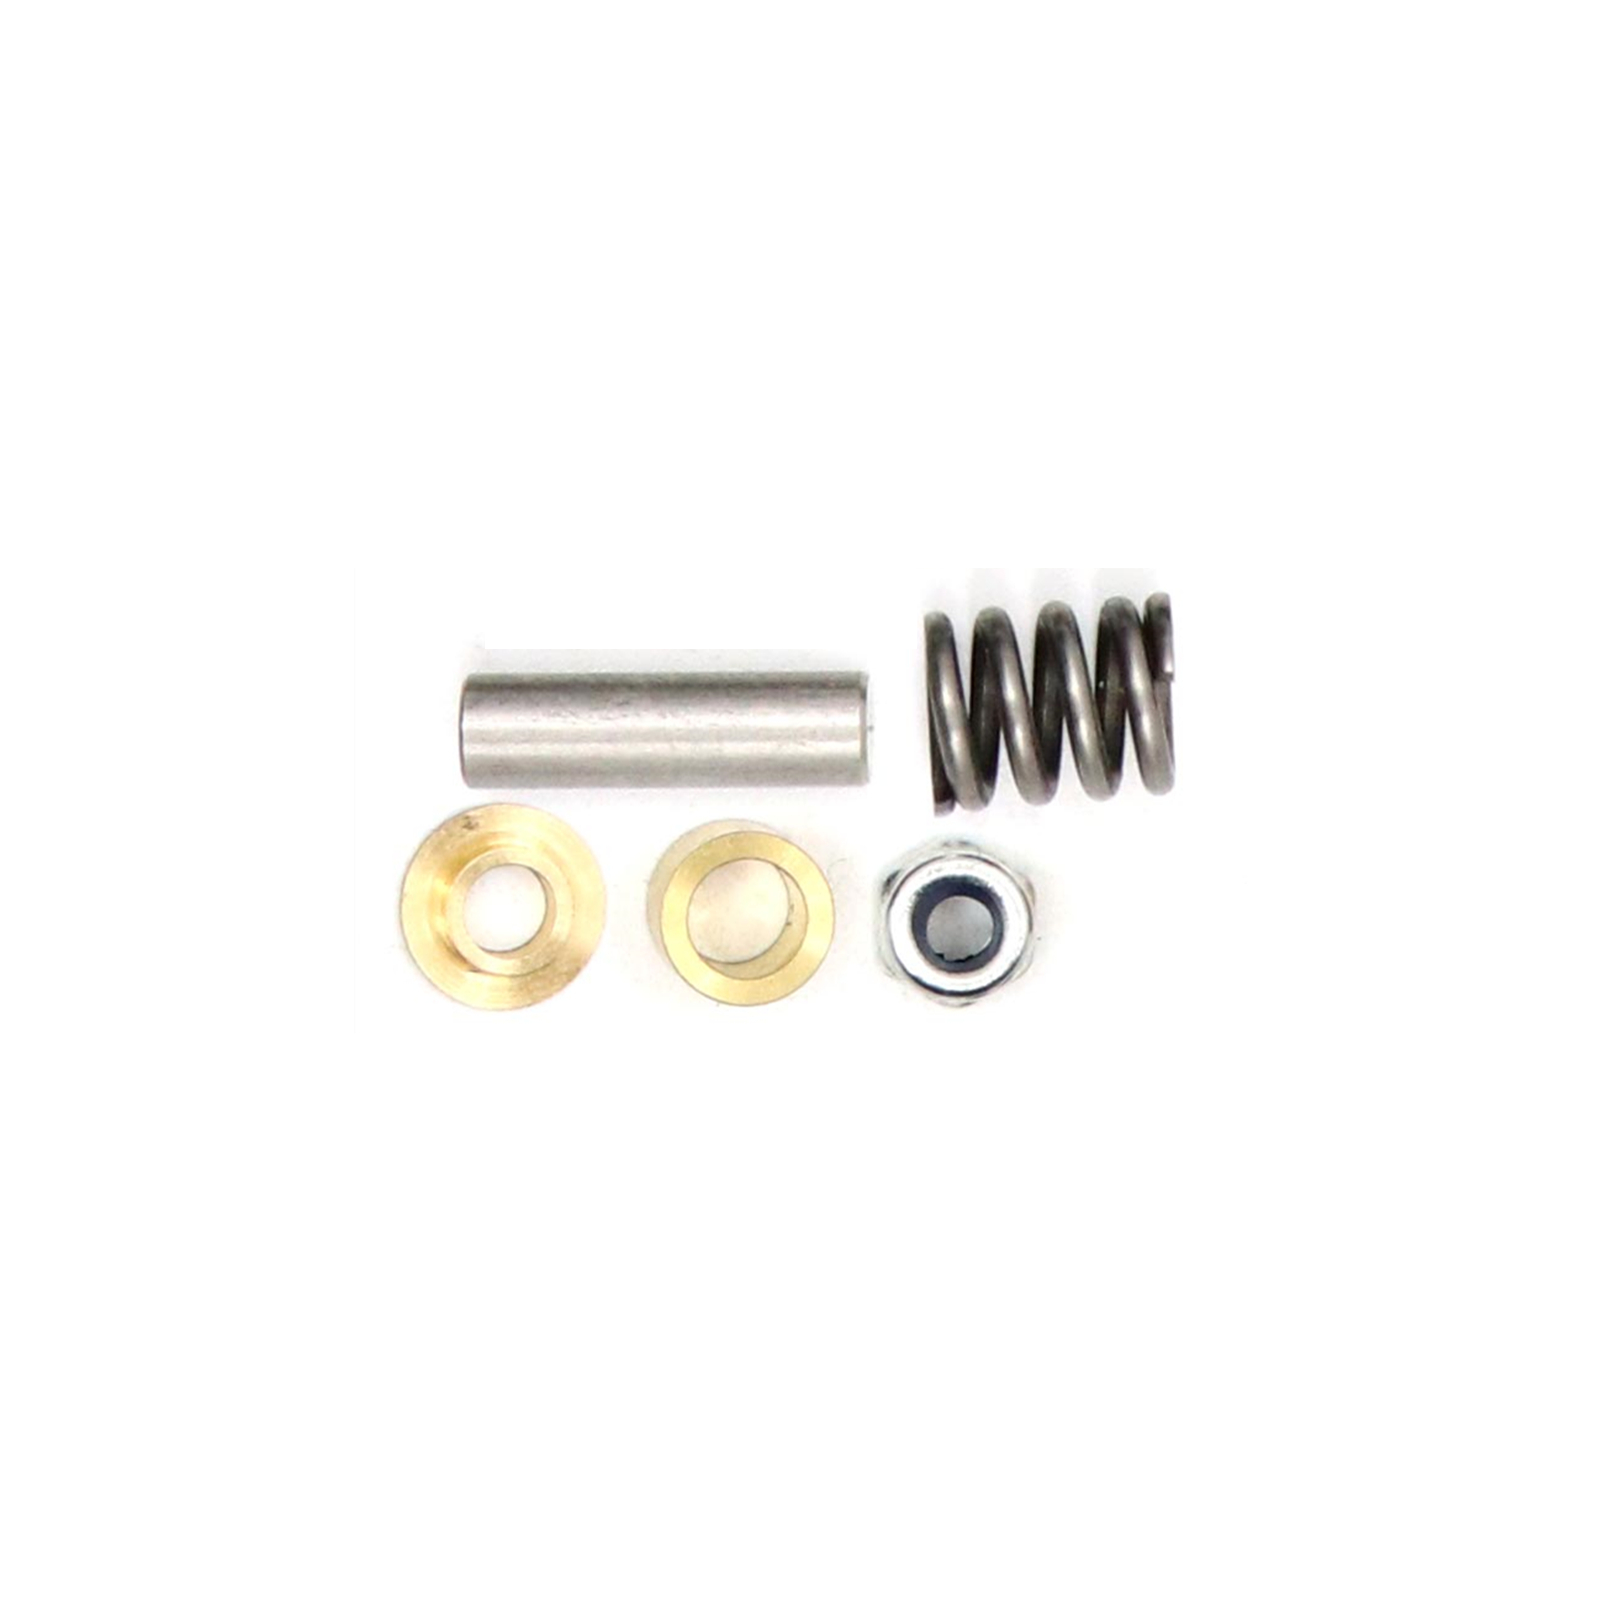 Details about   Black Heavy Duty Steel Transmission Gear Set For 1/10 RC Car Axial SCX10 Gearbox